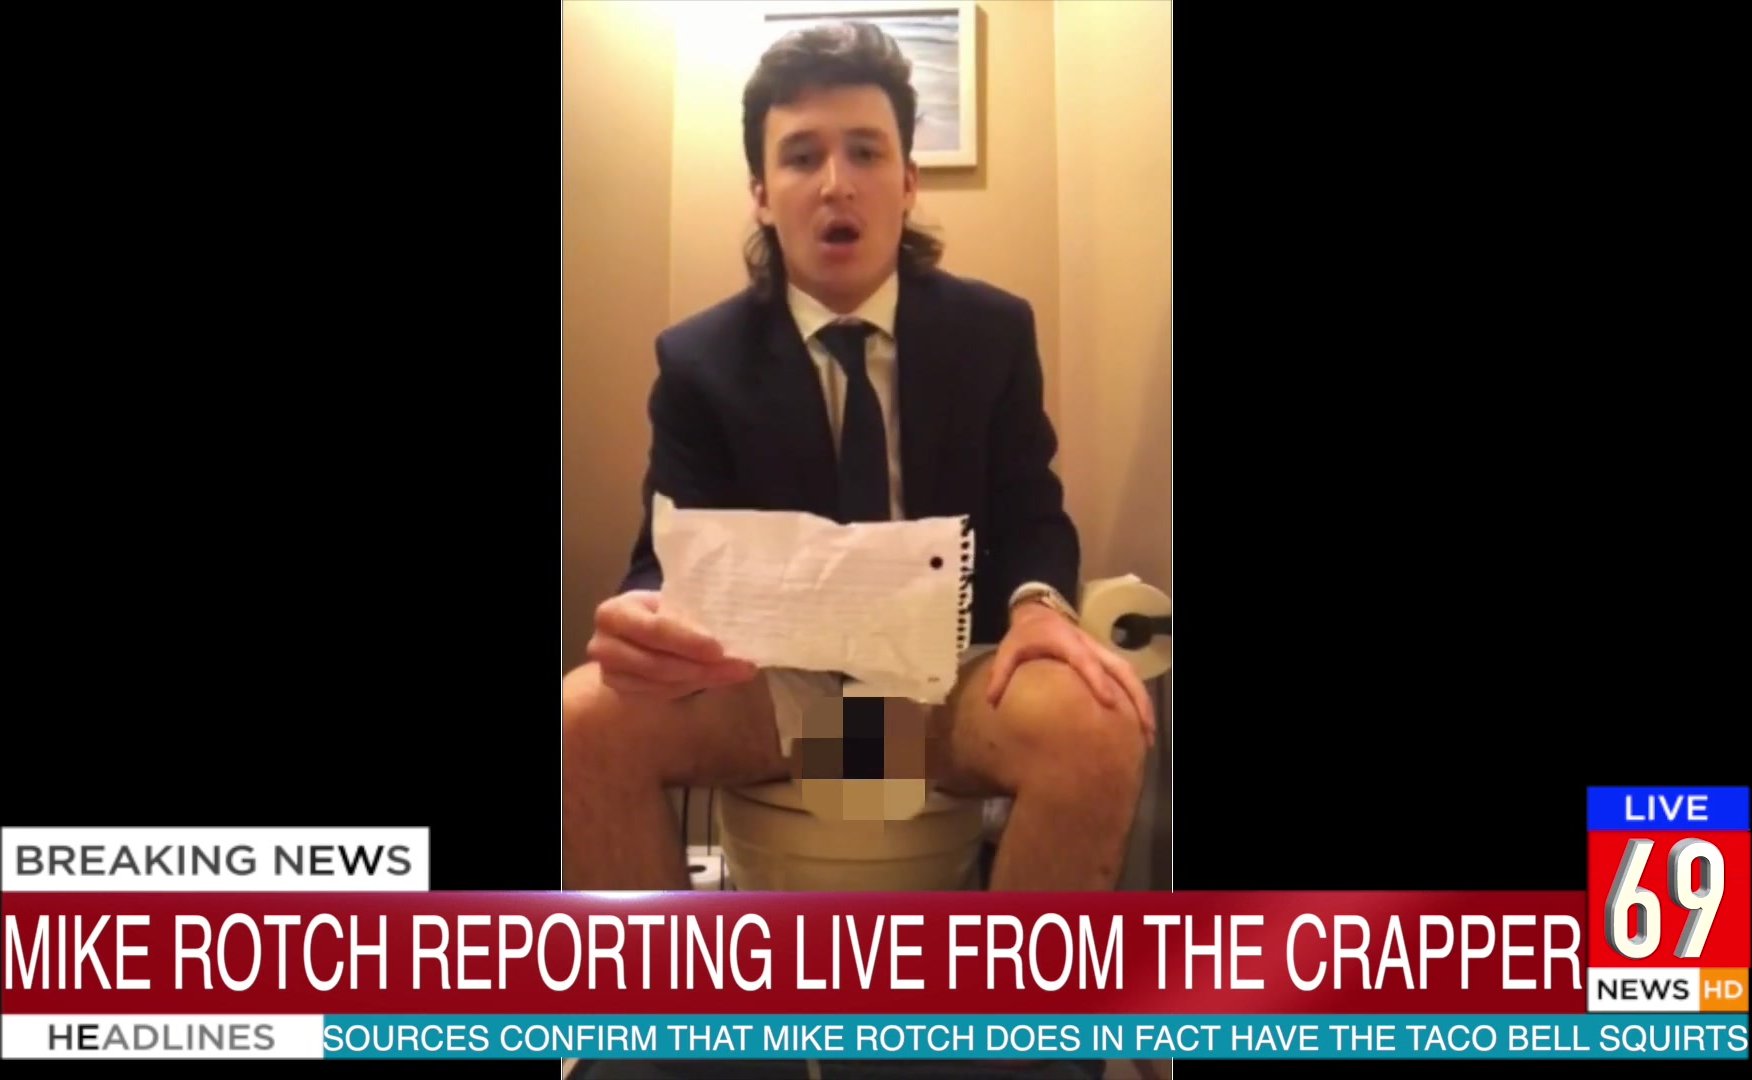 News reporter on the toilet